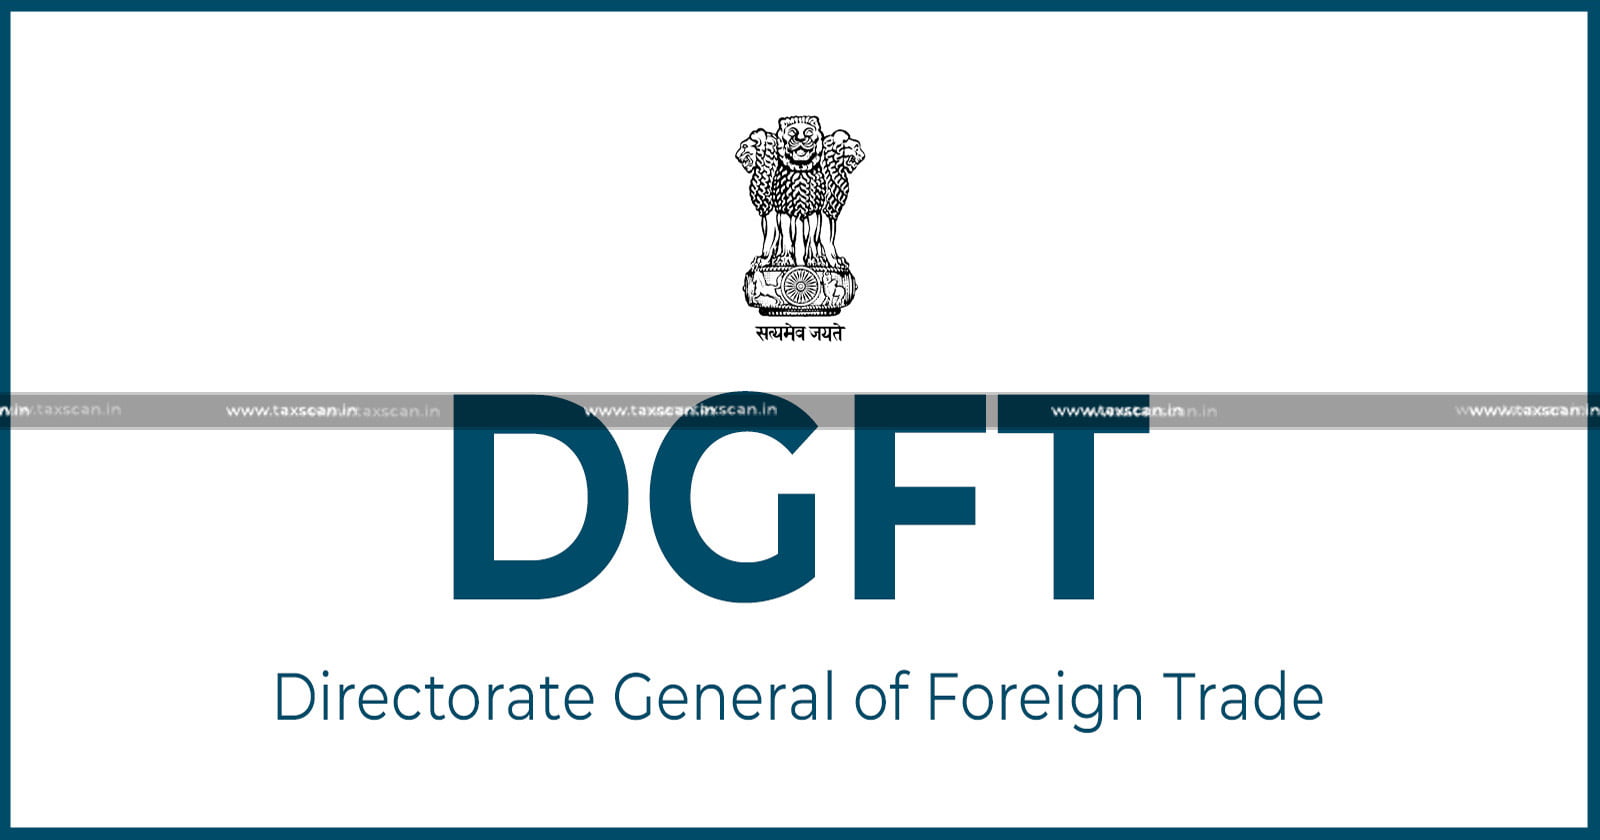 DGFT issues Trade Notice - Trade Notice - Directorate General of Foreign Trade - Amnesty Scheme - Export Obligations - Export Promotion Capital Goods Schemes - TAXSCAN